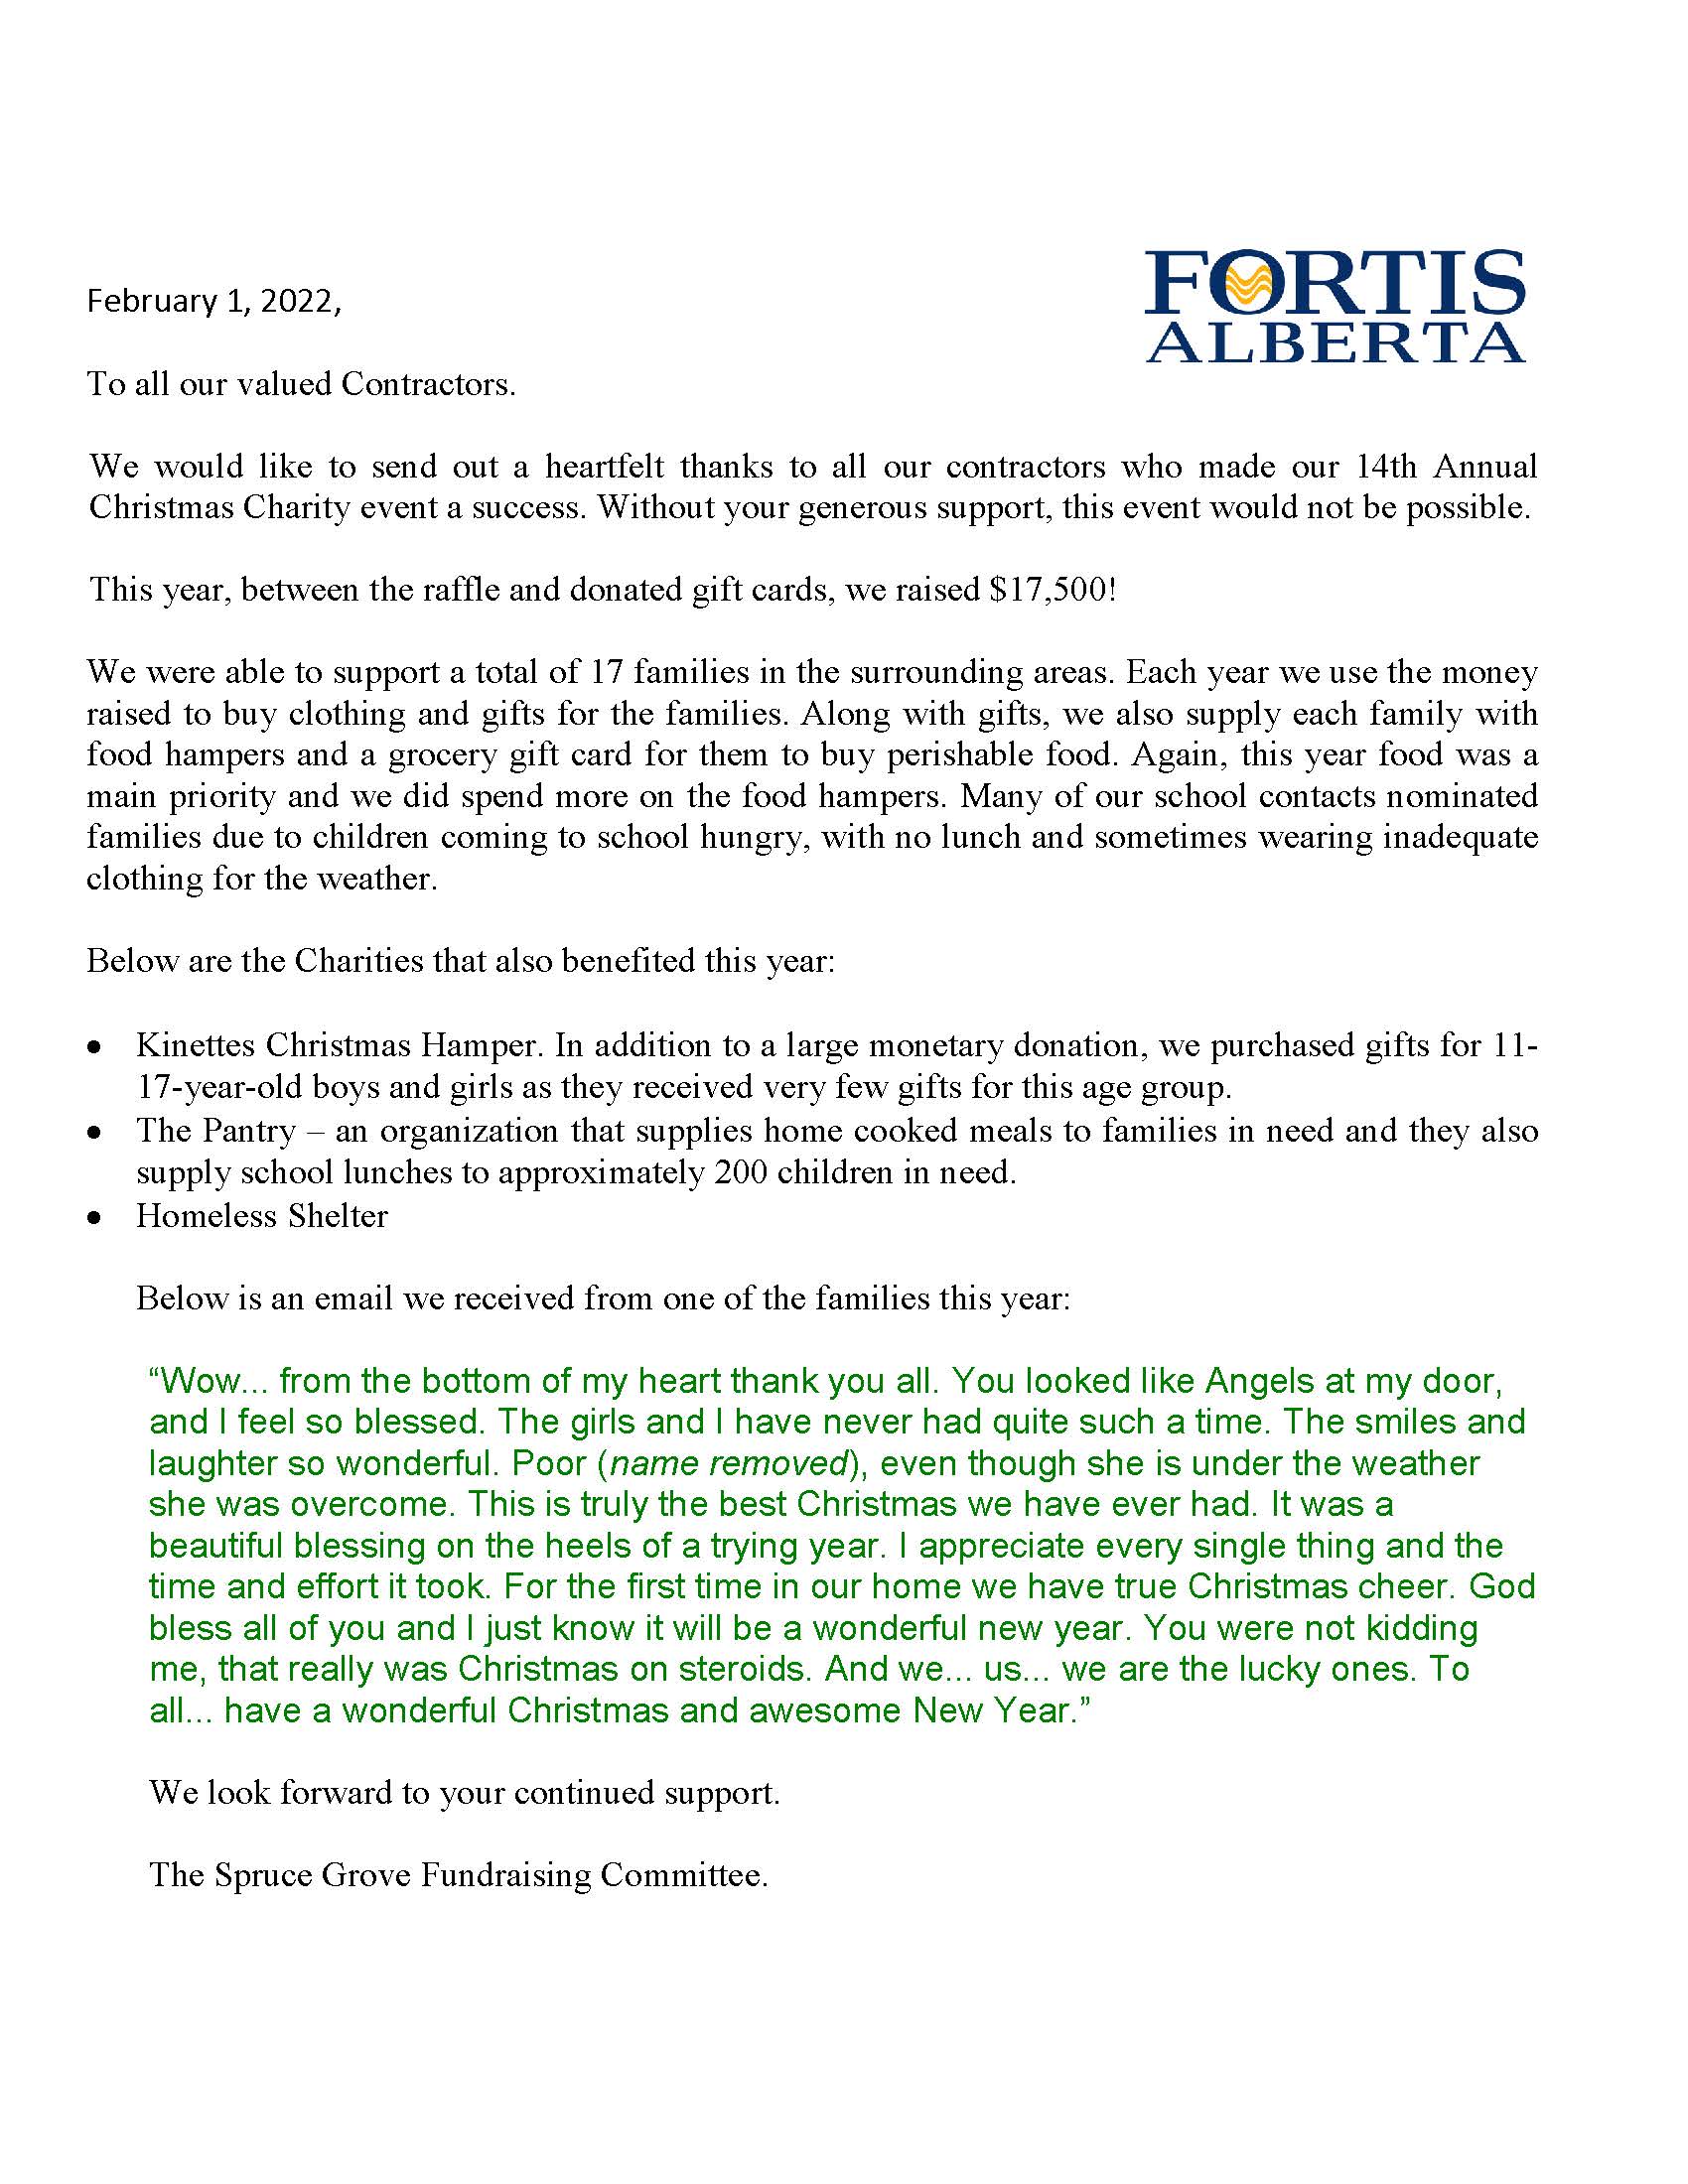 14th Annual Christmas Charity Event Thank You Letter